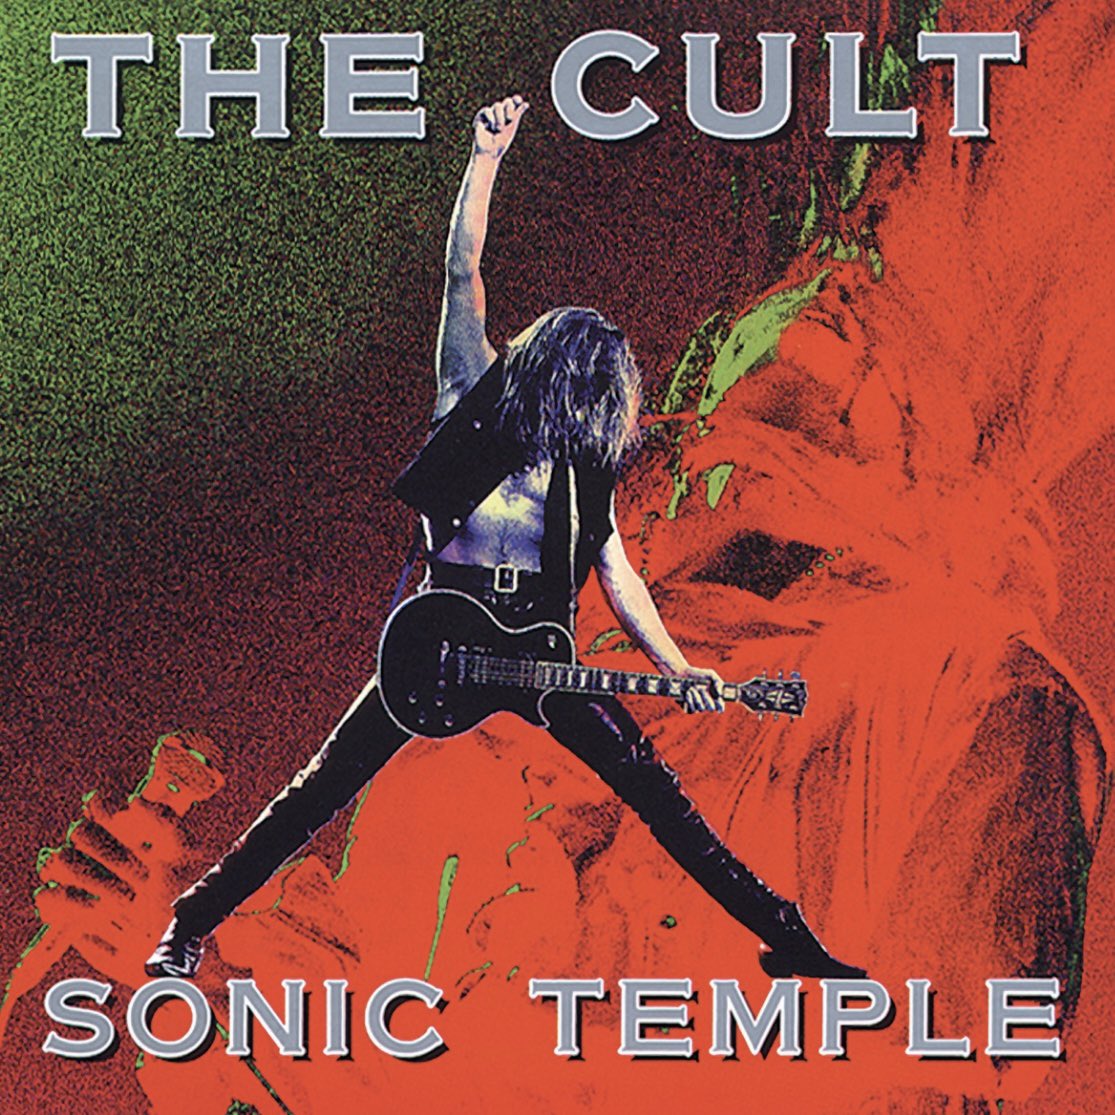 #AOTD #AlbumOfTheDay #NP #NowPlaying #TheCult #SonicTemple